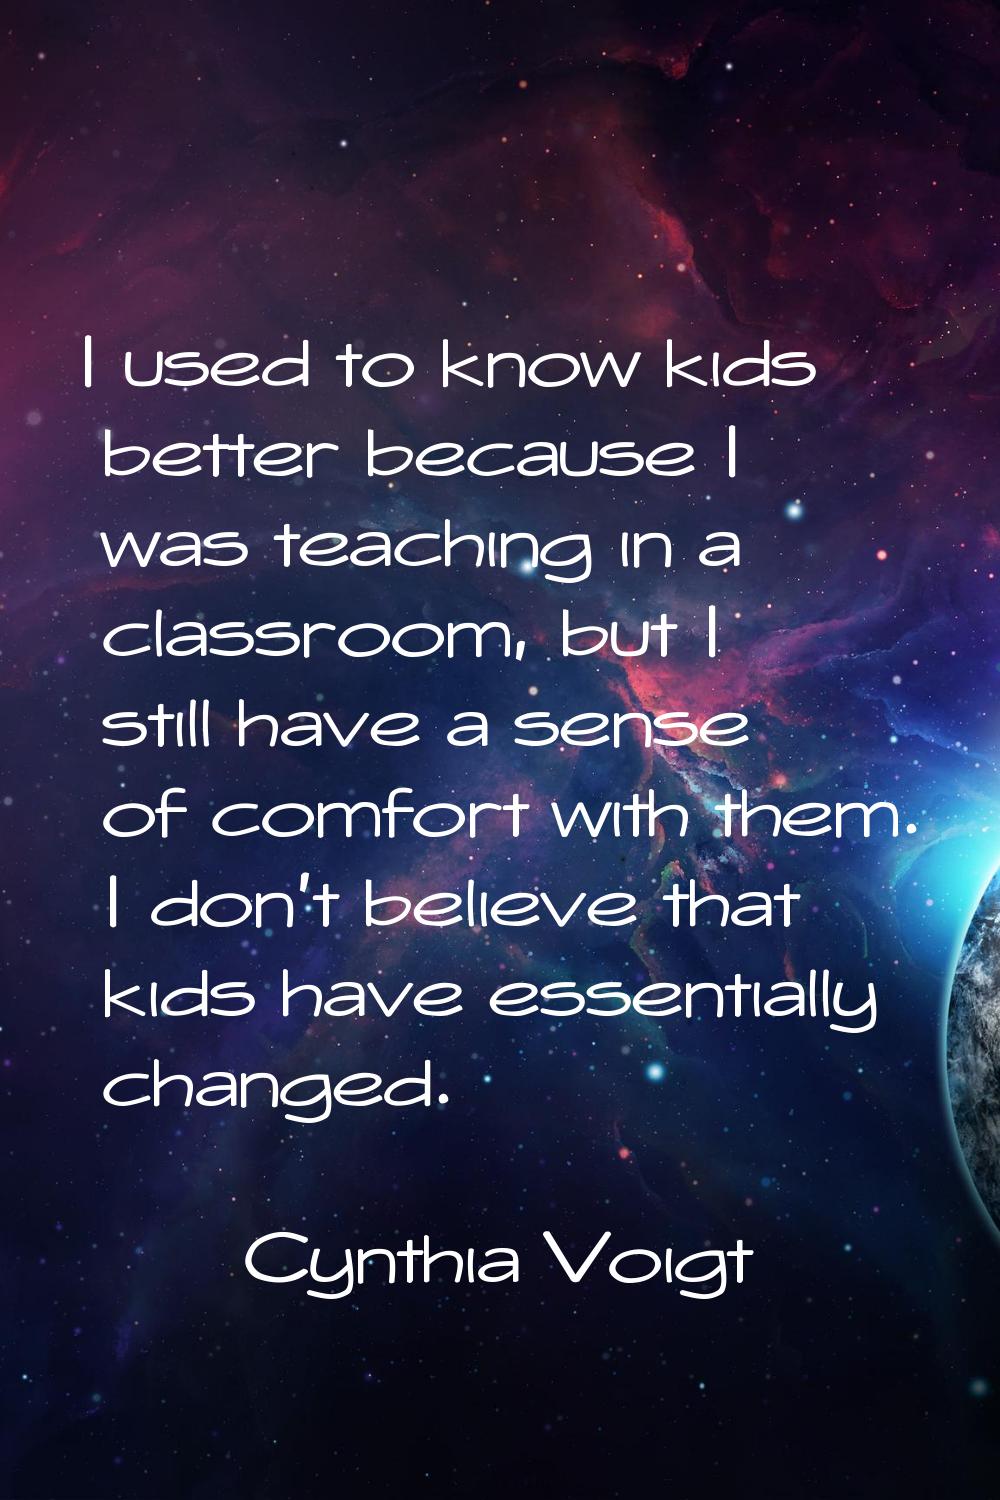 I used to know kids better because I was teaching in a classroom, but I still have a sense of comfo